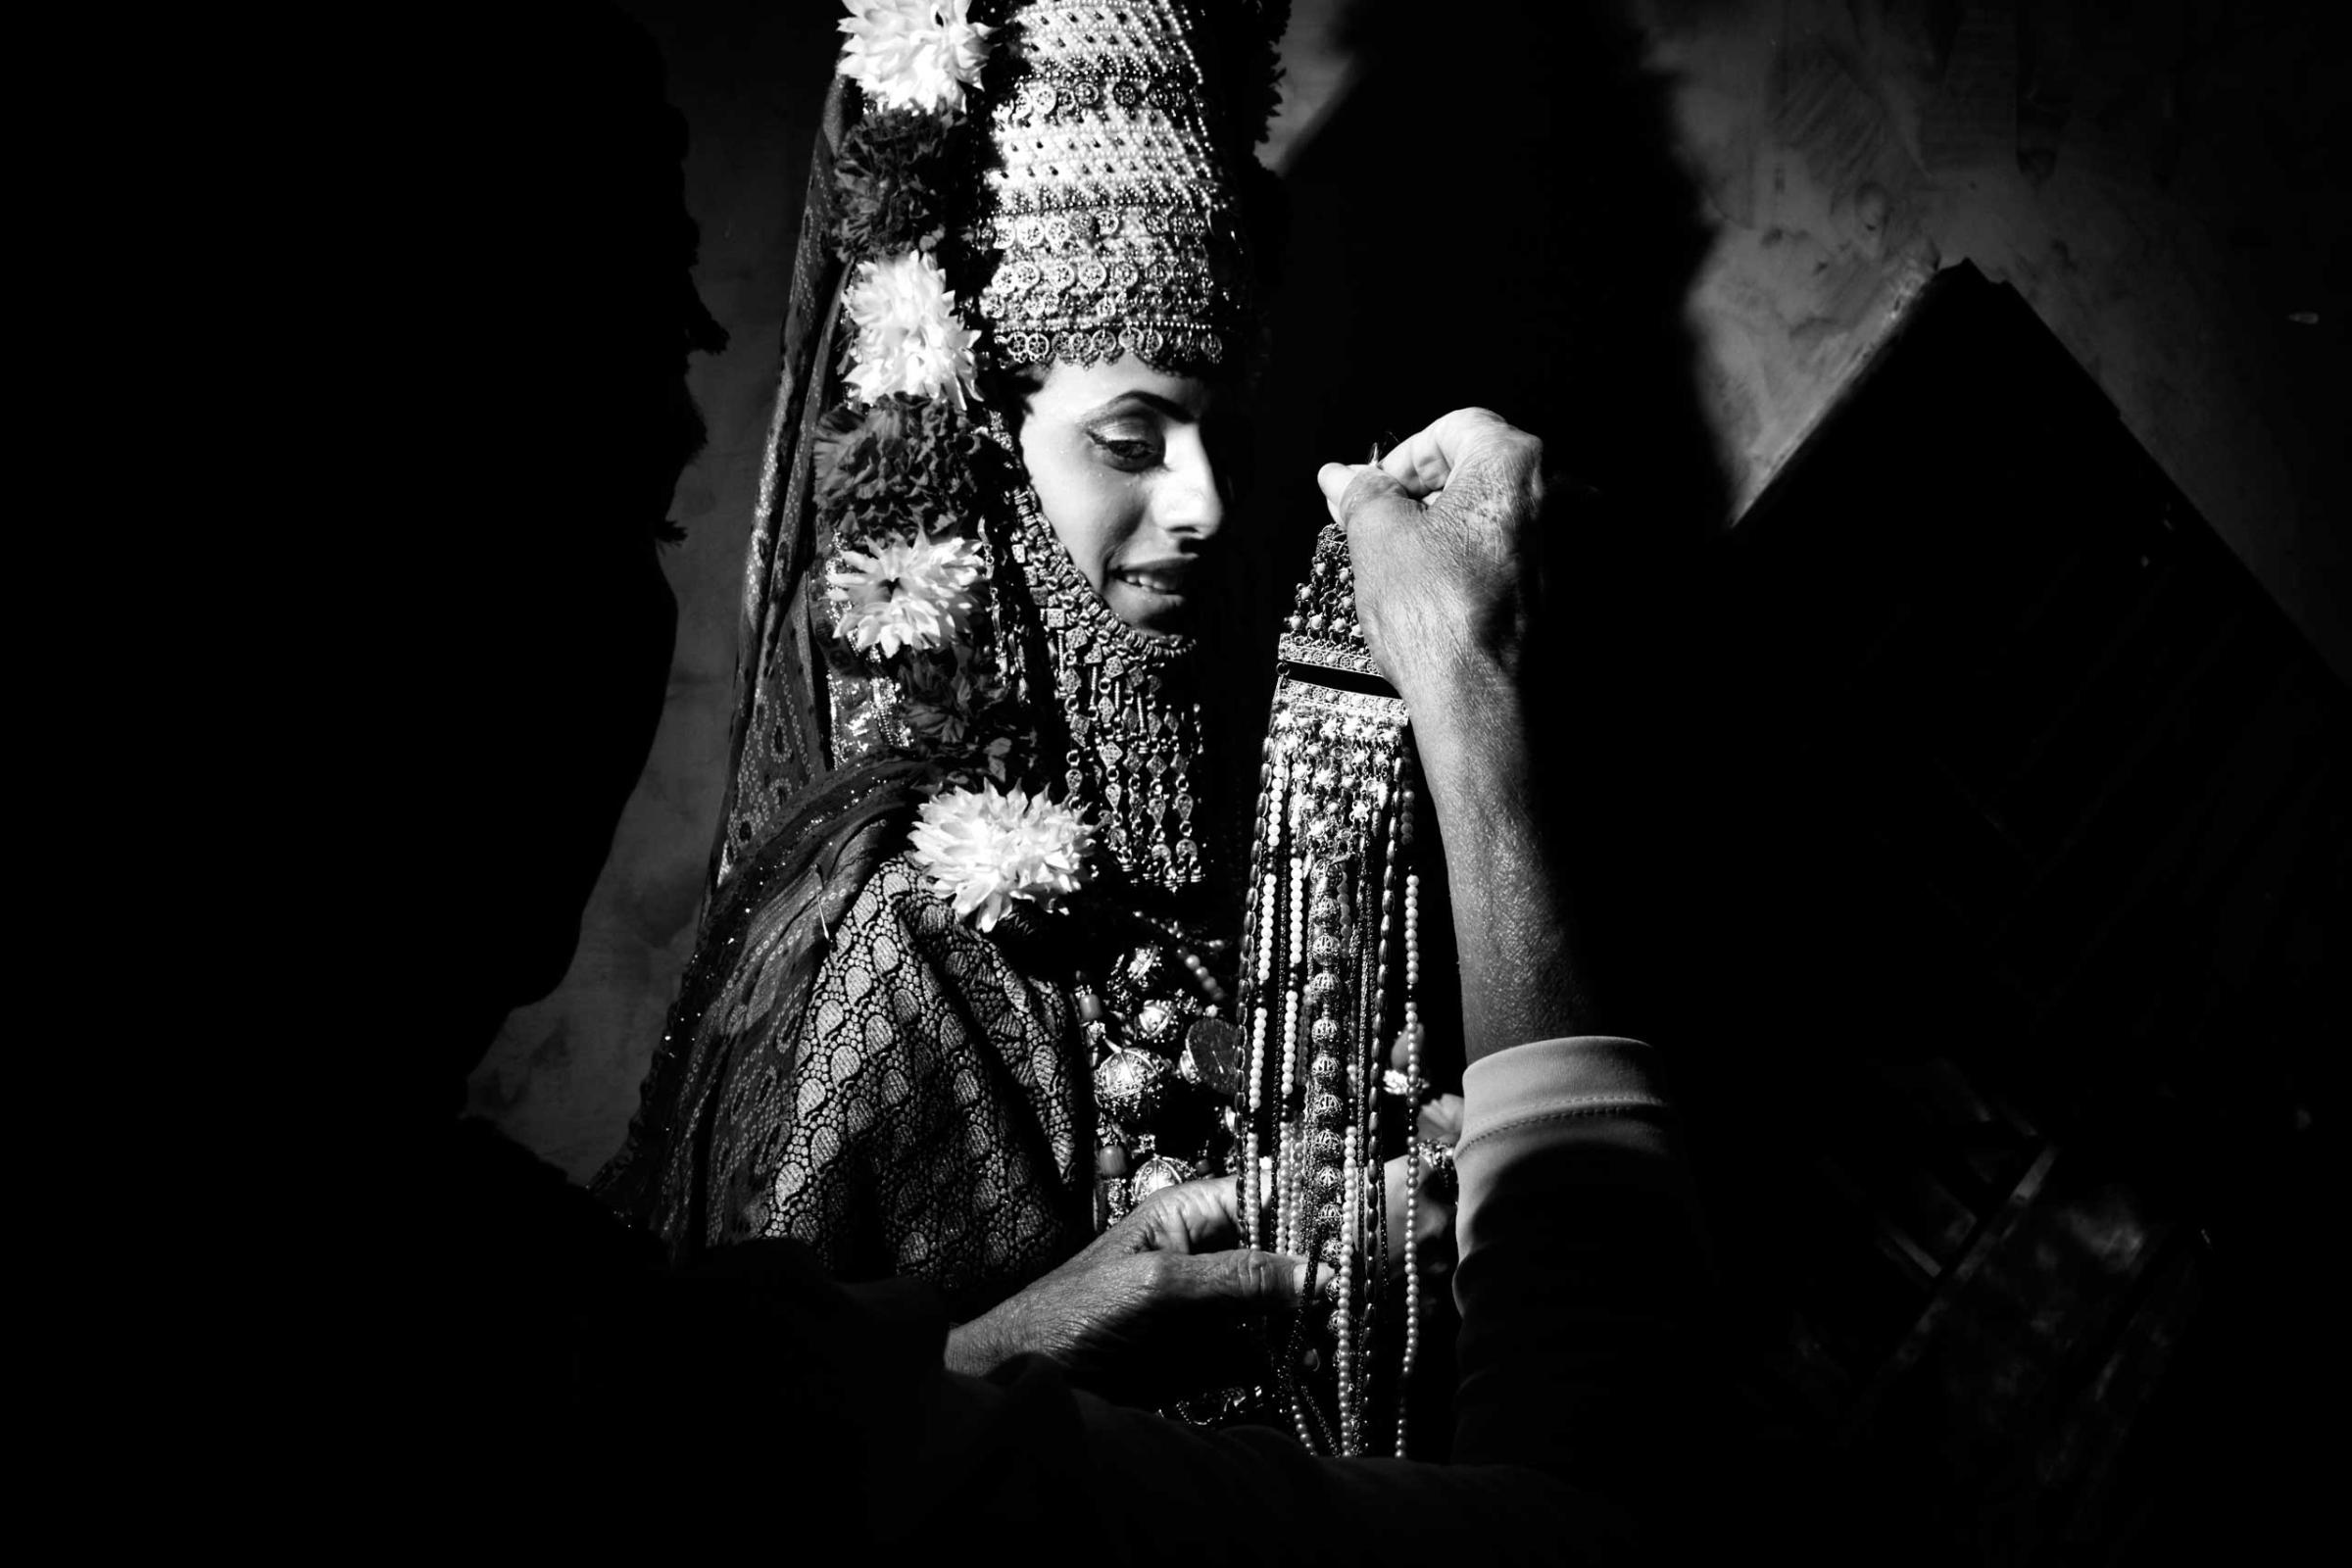 The henna is a pre-nuptial cerimony celebrated in Moroccan or Yemenite families where the soon-to-be bride is dressed-up as a Queen with flowers and jewels and she is inivited to dance with her girl friends to say good-bye to celibacy and life as a single young girl. During the dance cerimony, the Kallah, the bride-to-be's hands and feet are painted with henne`, the red pouder from India. This welcomes fertility and happinesses within the marriage. Meah Shearim, Jerusalem, Israel. July 2012.